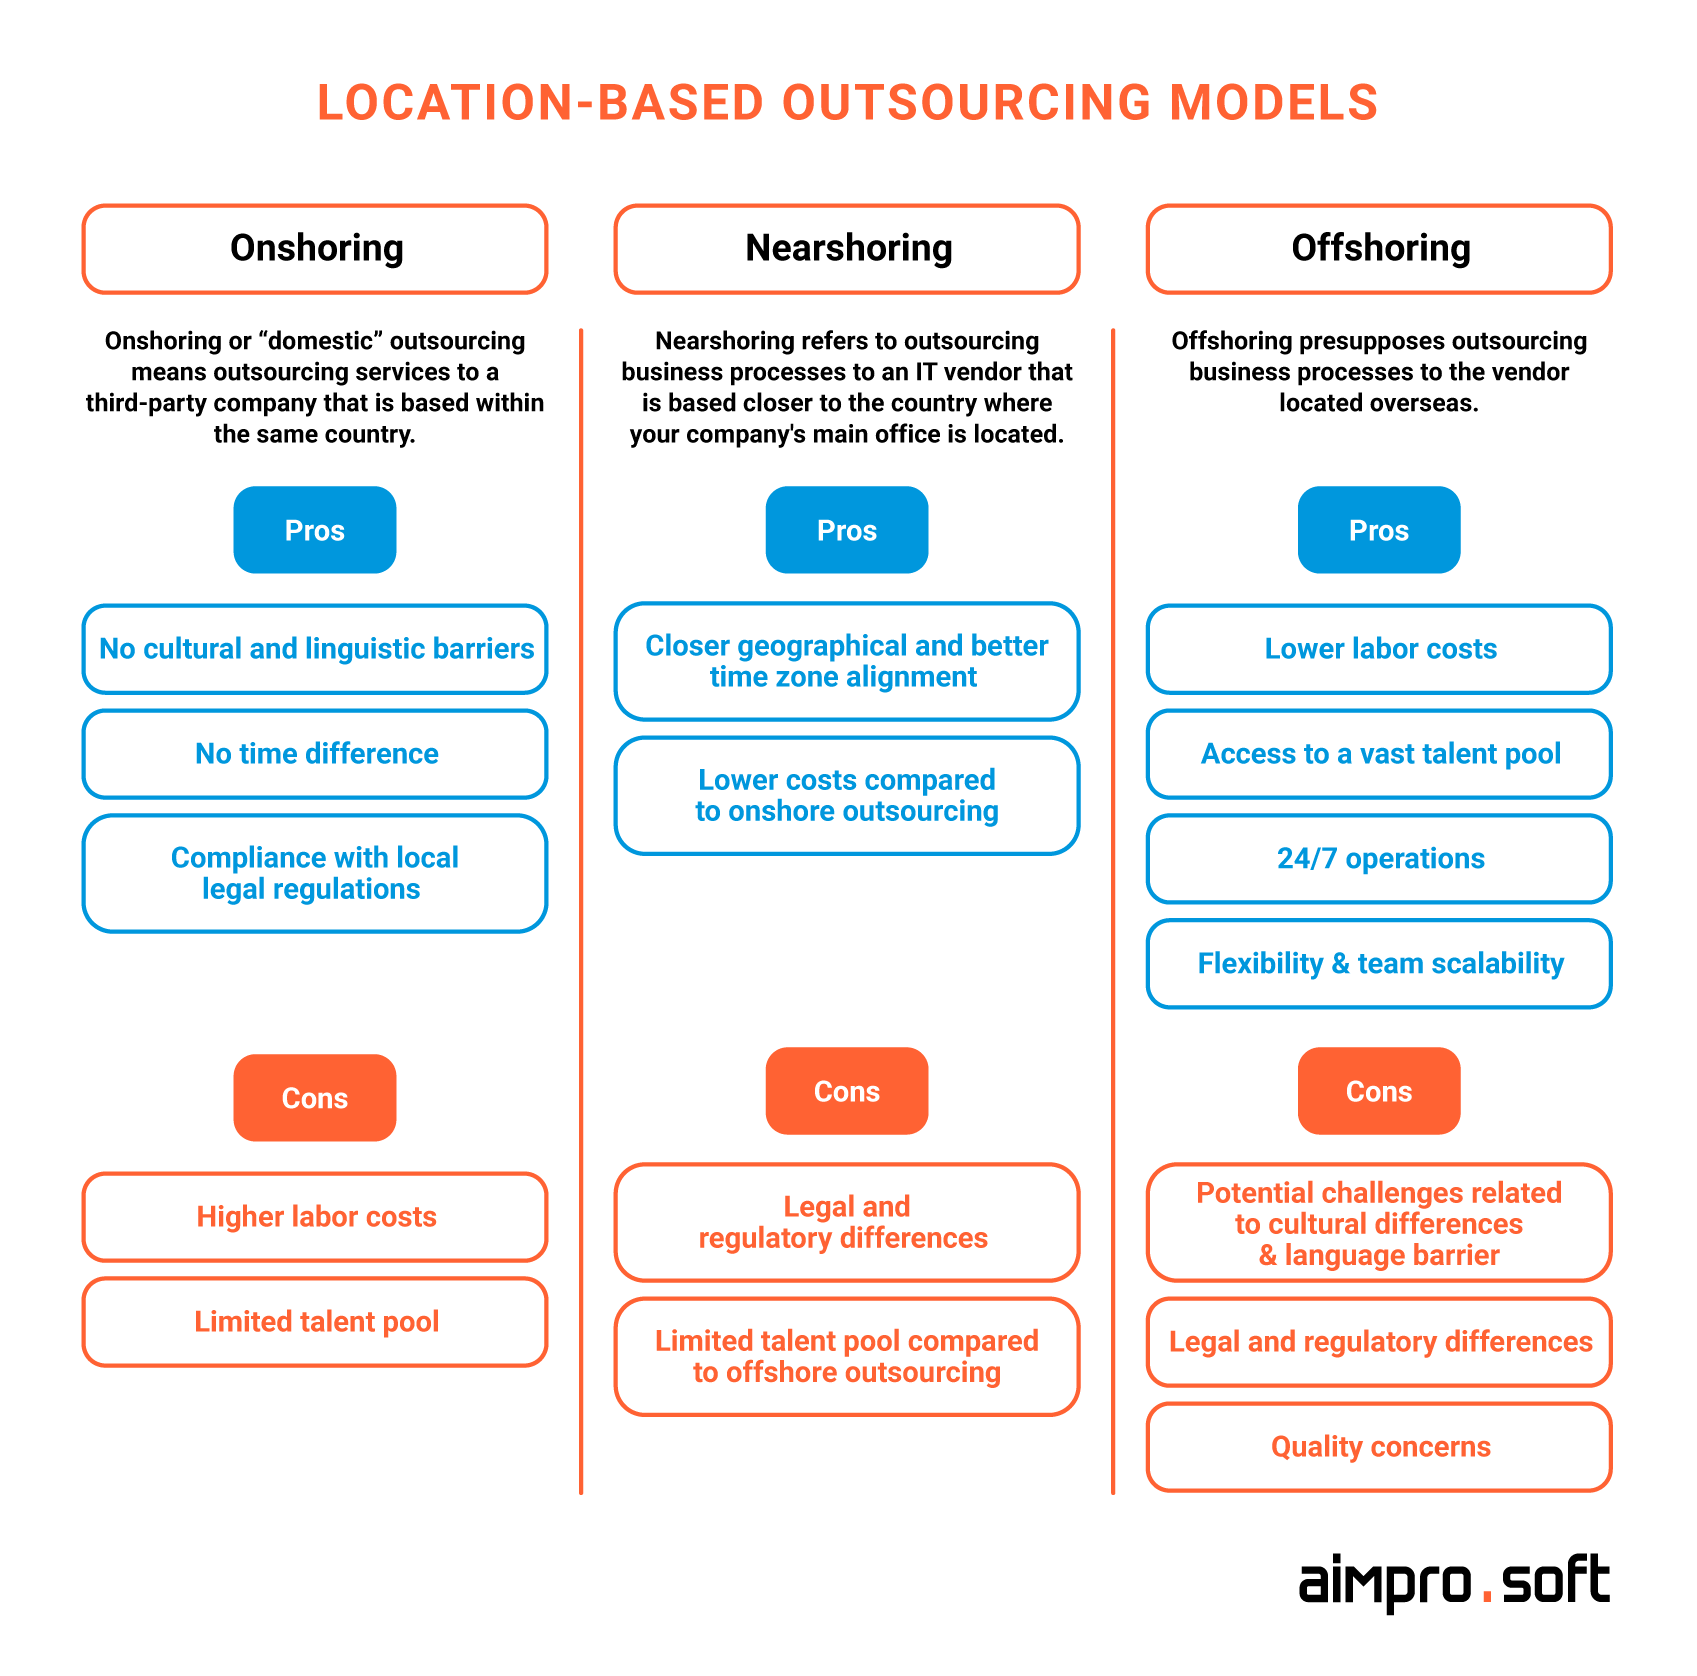 Location-based outsourcing models